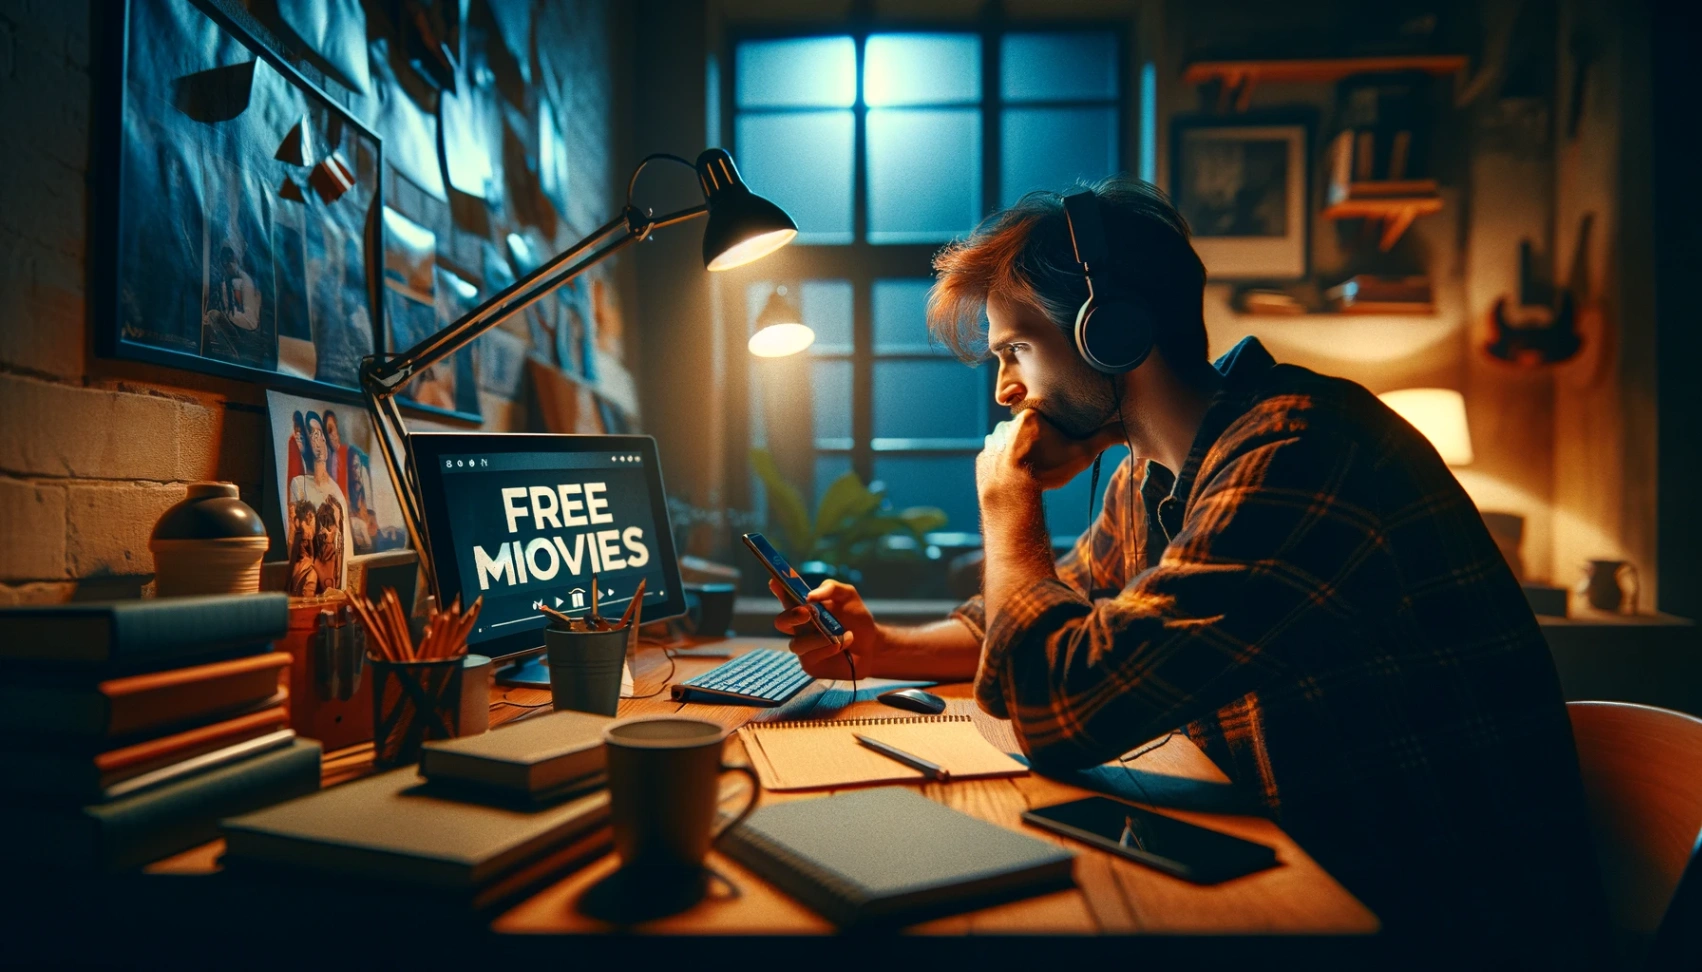 Learn How to Watch Free Movies on Your Mobile